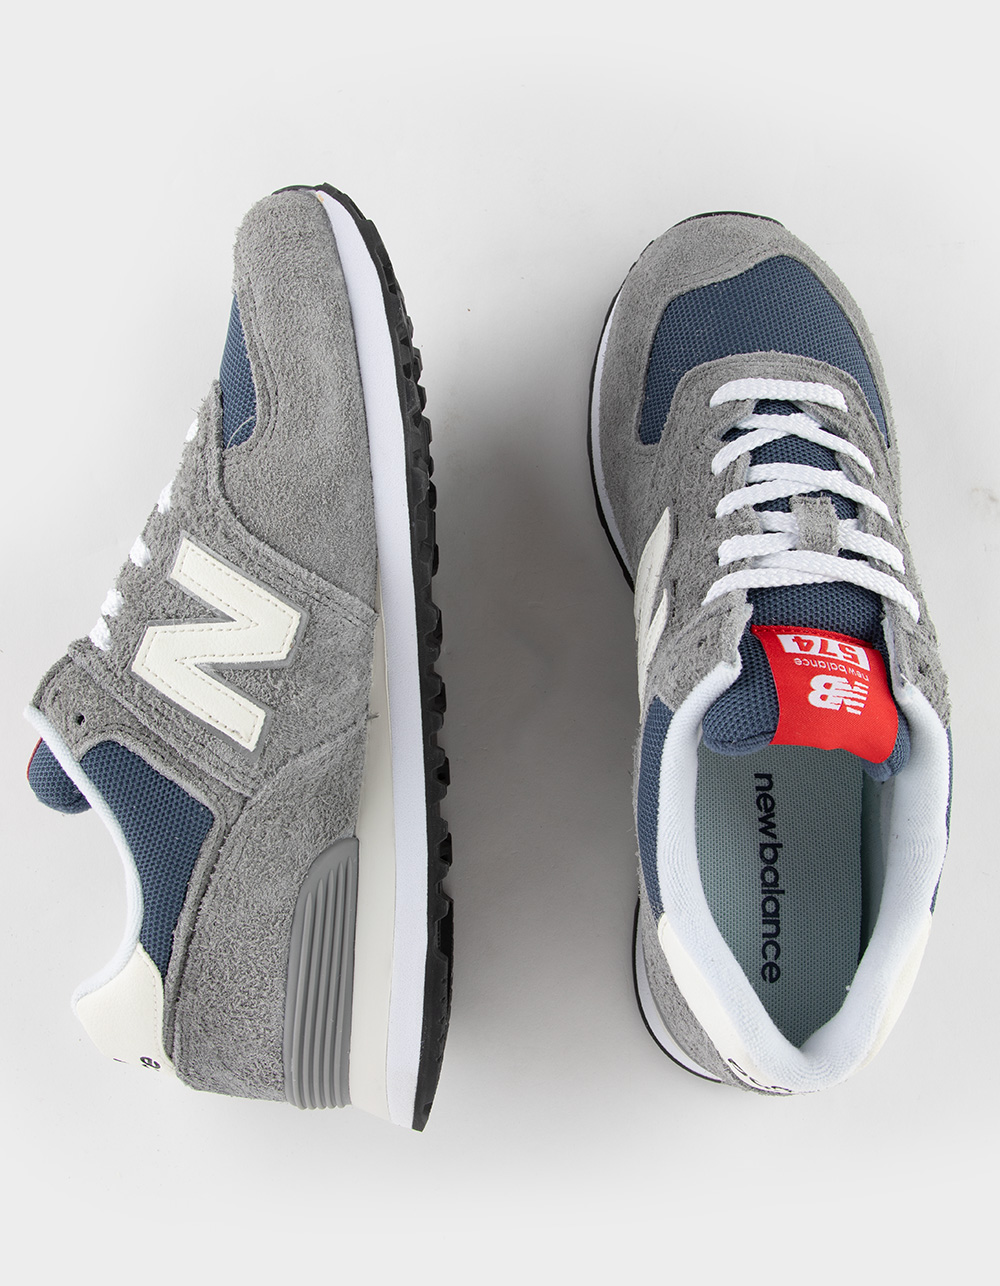 NEW BALANCE 574 Mens Shoes - GRY/NVY | Tillys